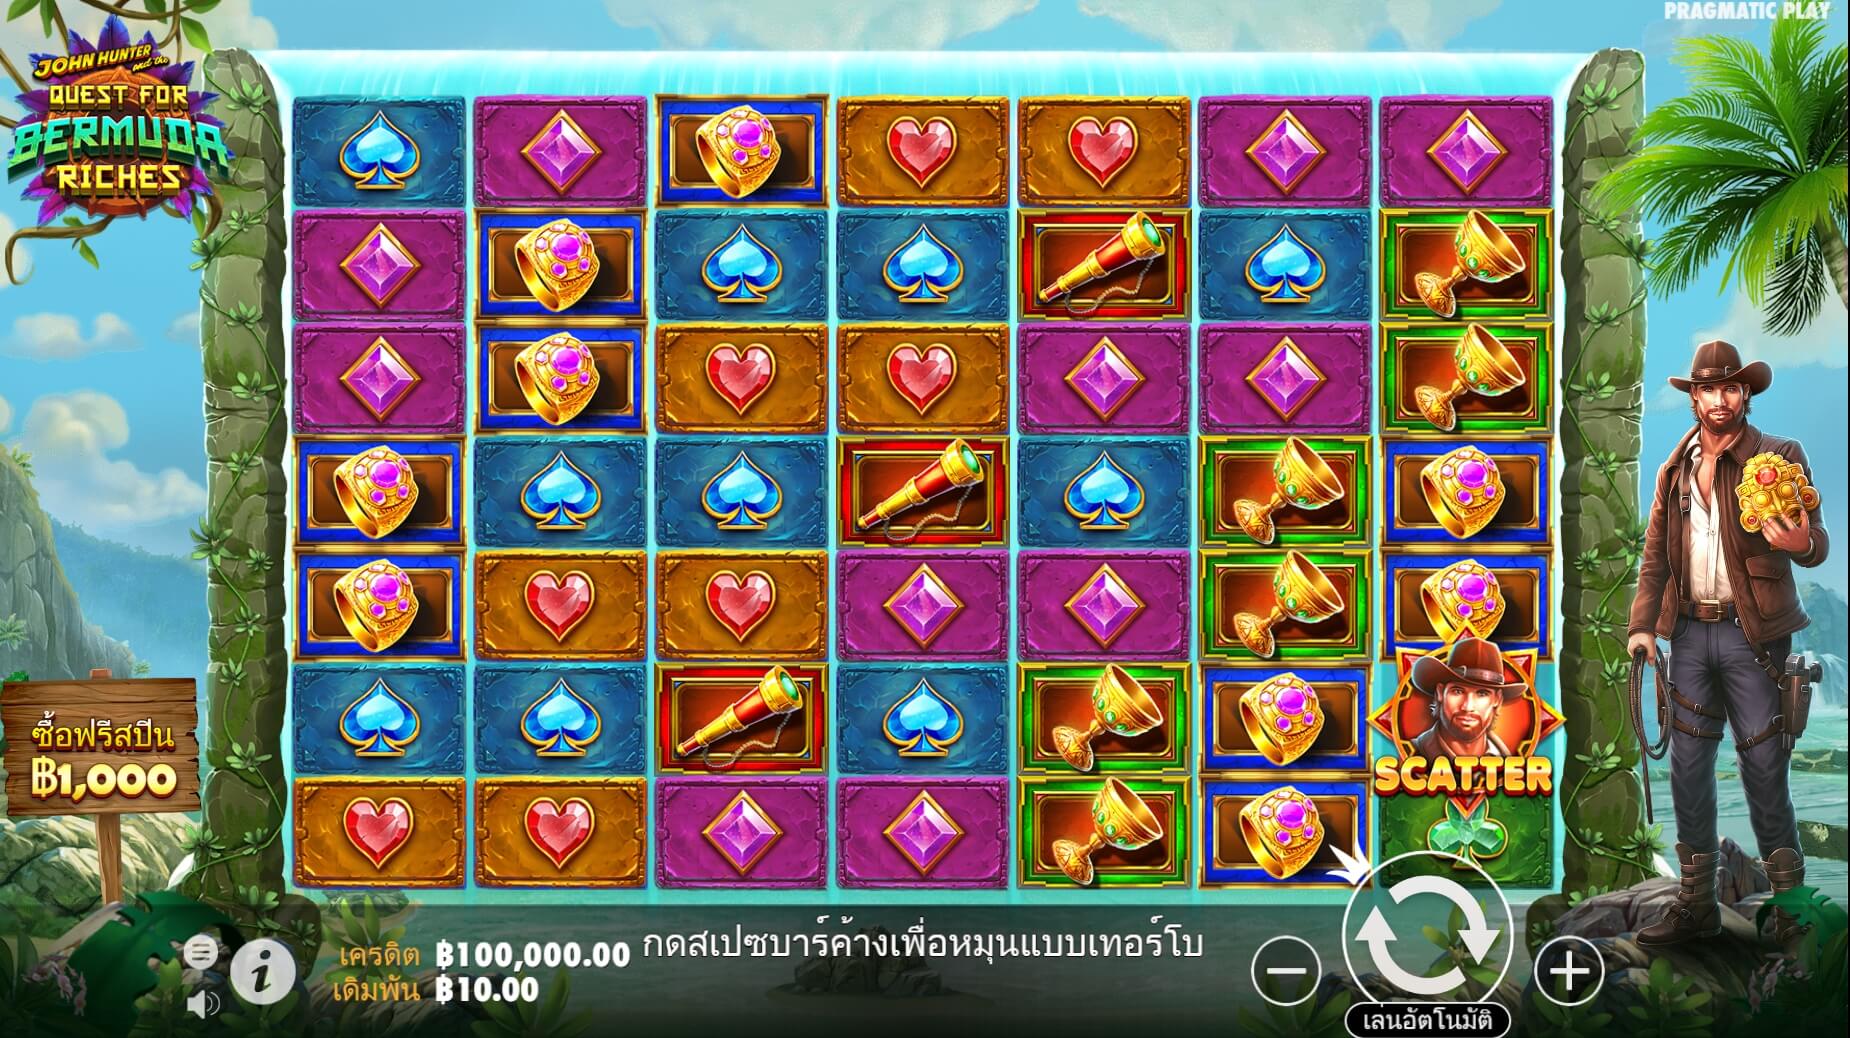 pragmatic play ฟรีเครดิต John Hunter and the Quest for Bermuda Riches Superslot เครดิตฟรี 300